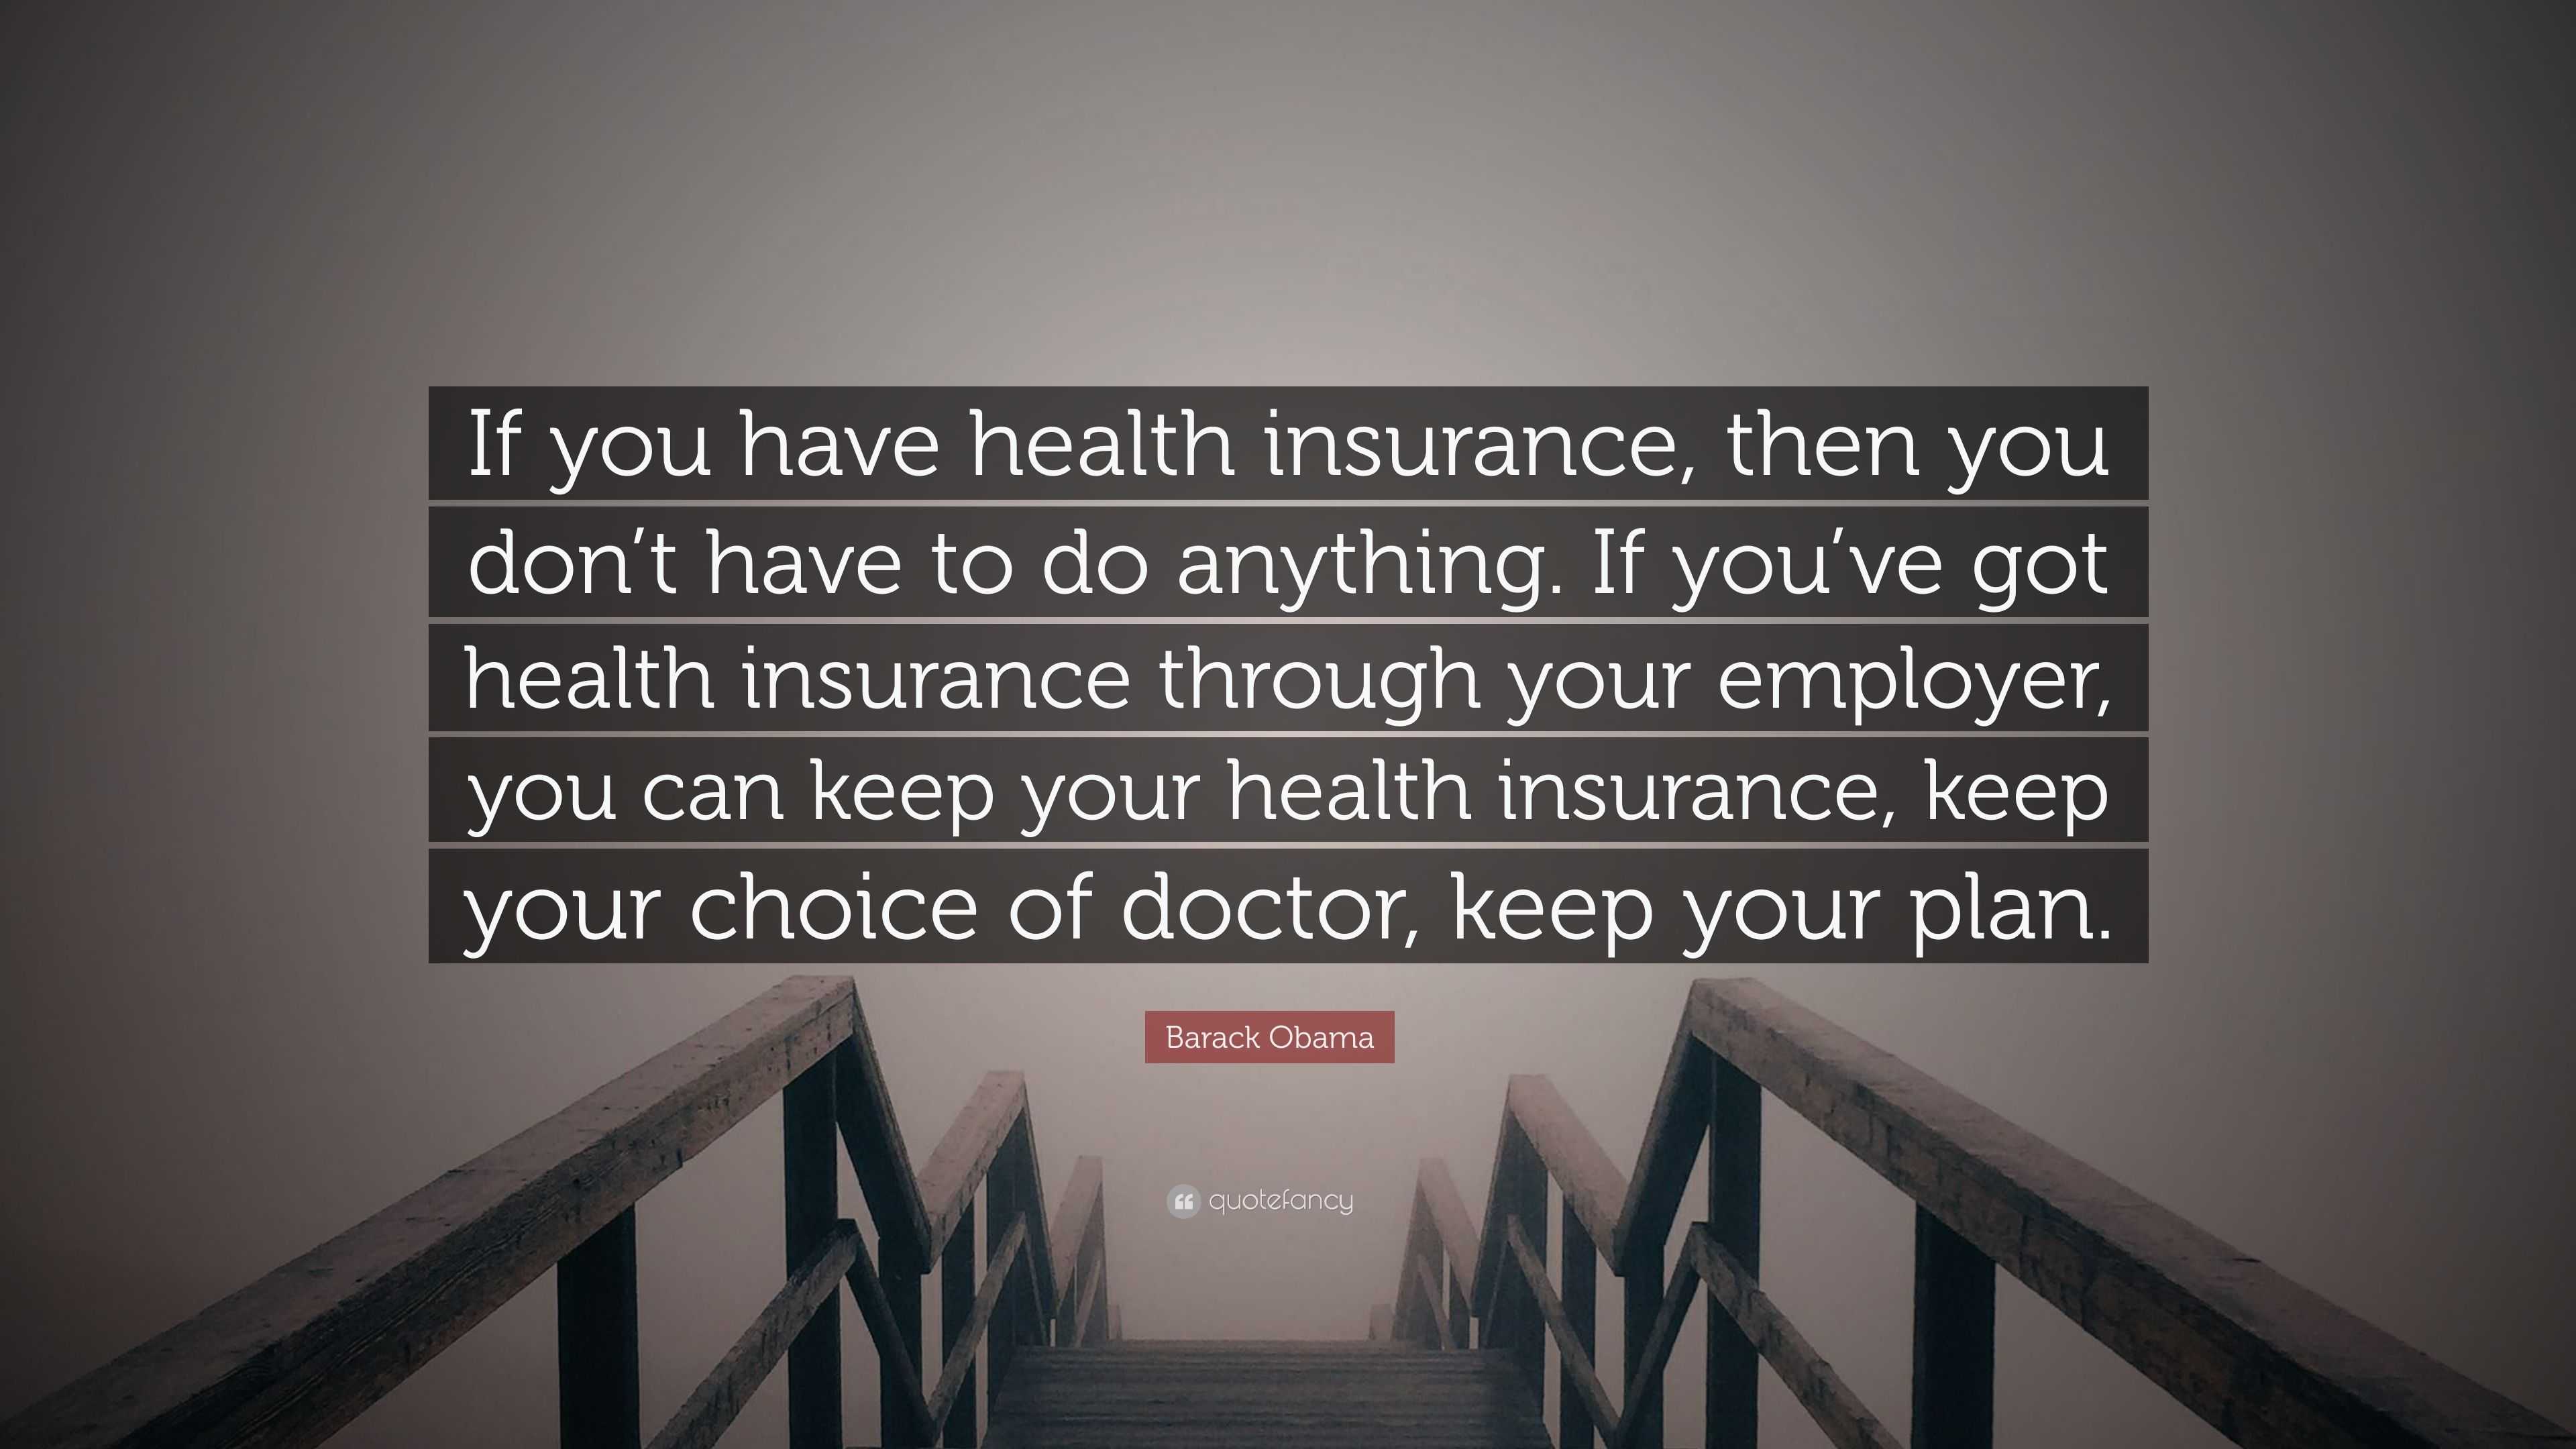 if you have health insurance through your employer